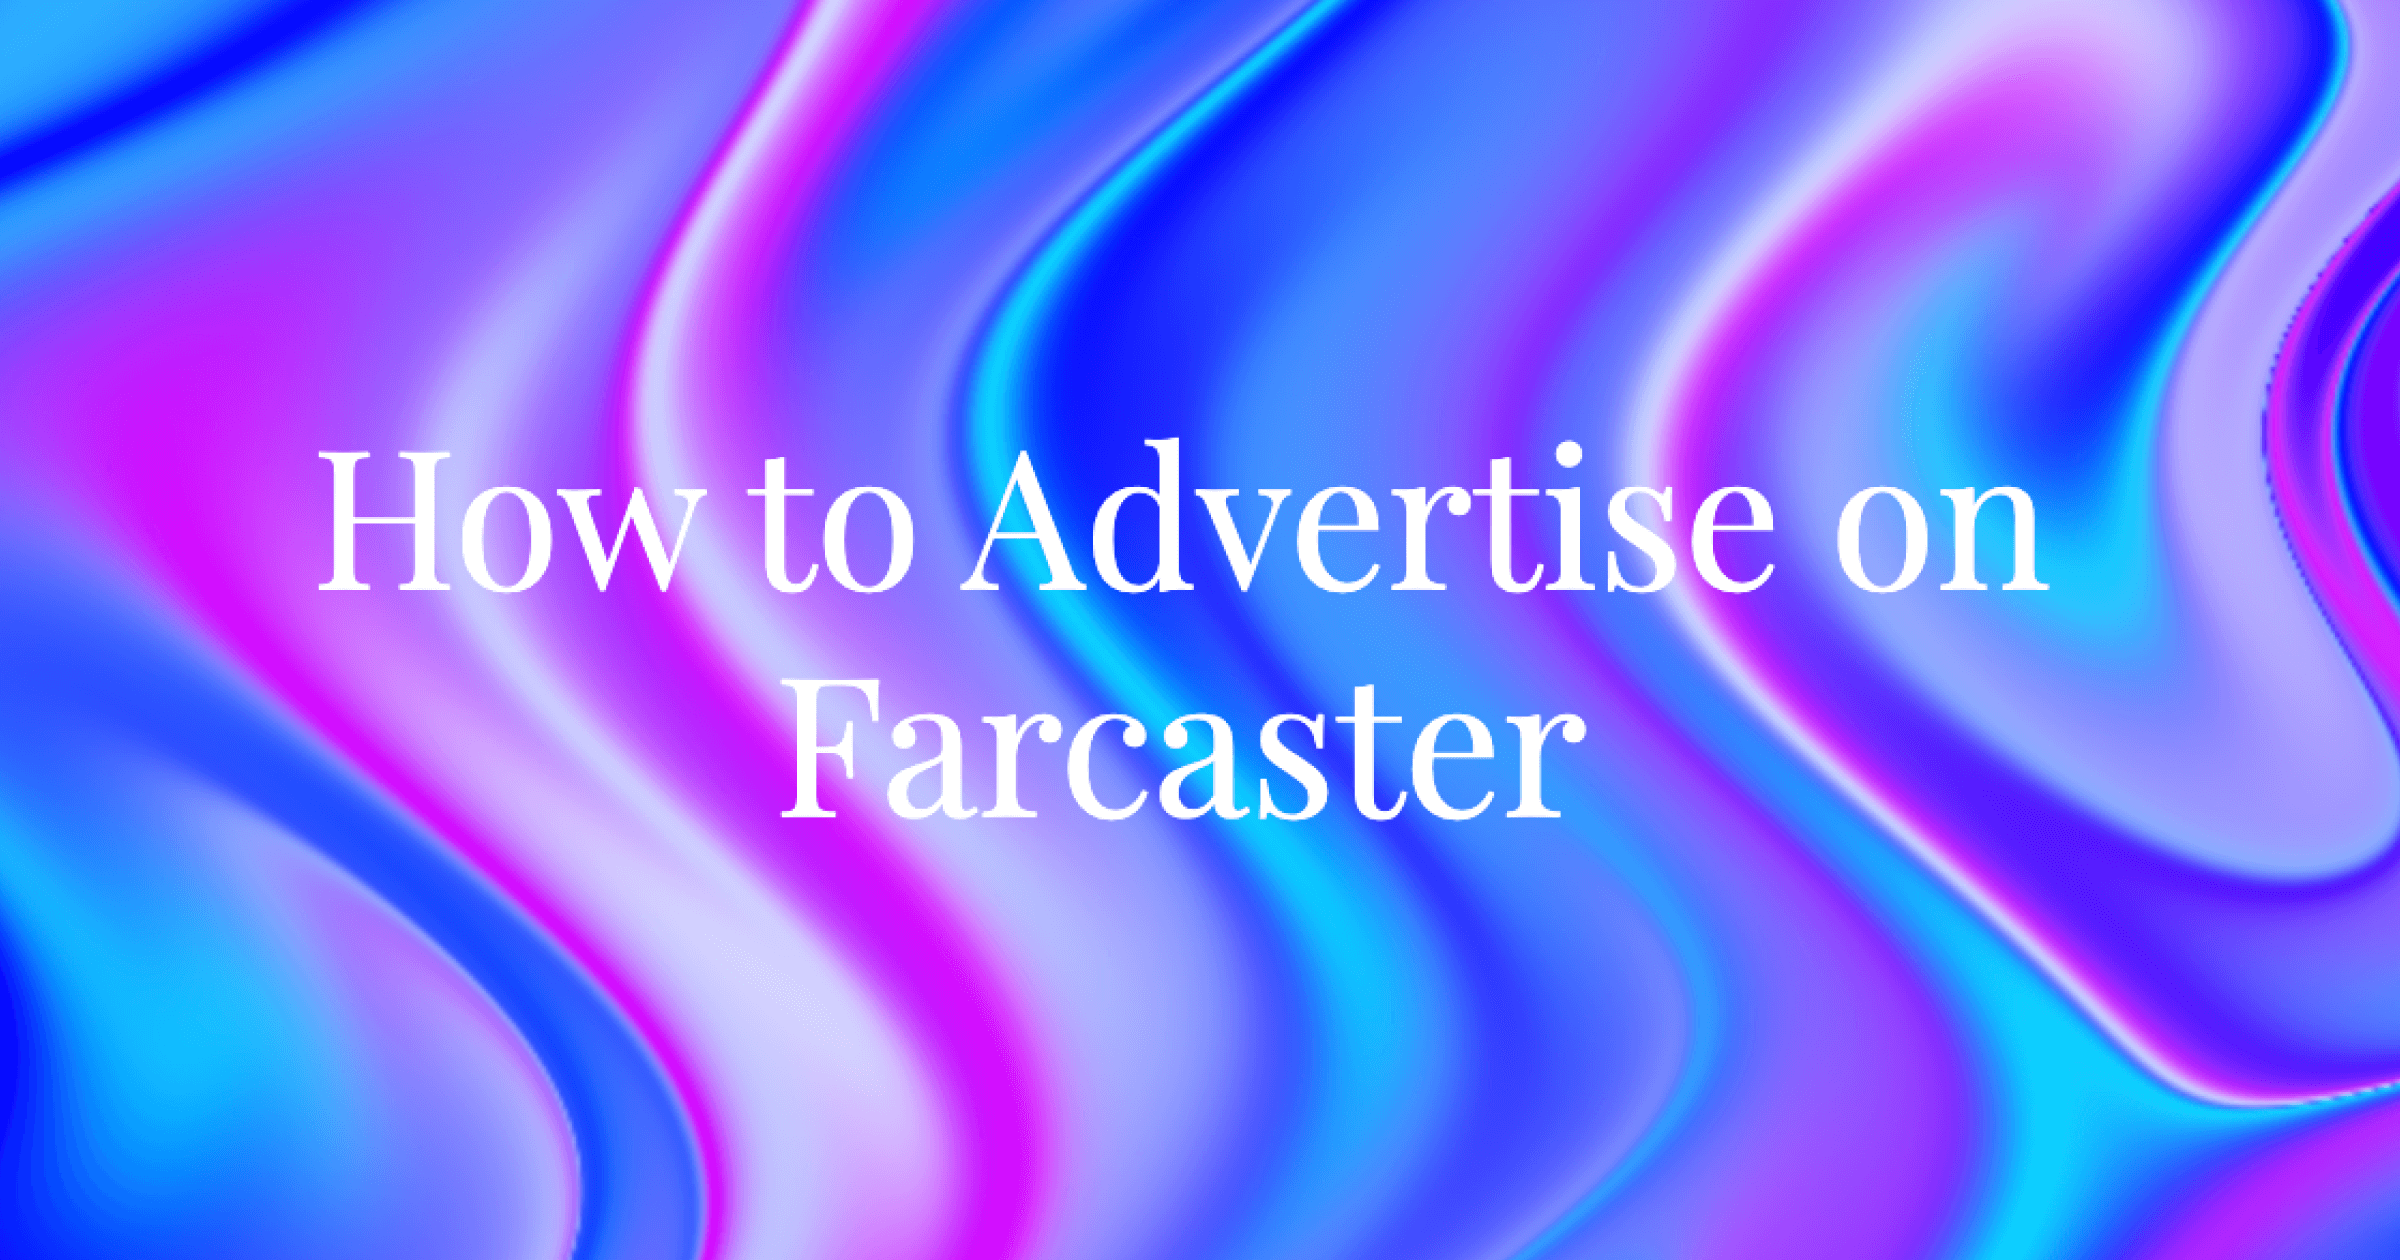 Cover Image for How to Advertise on Farcaster